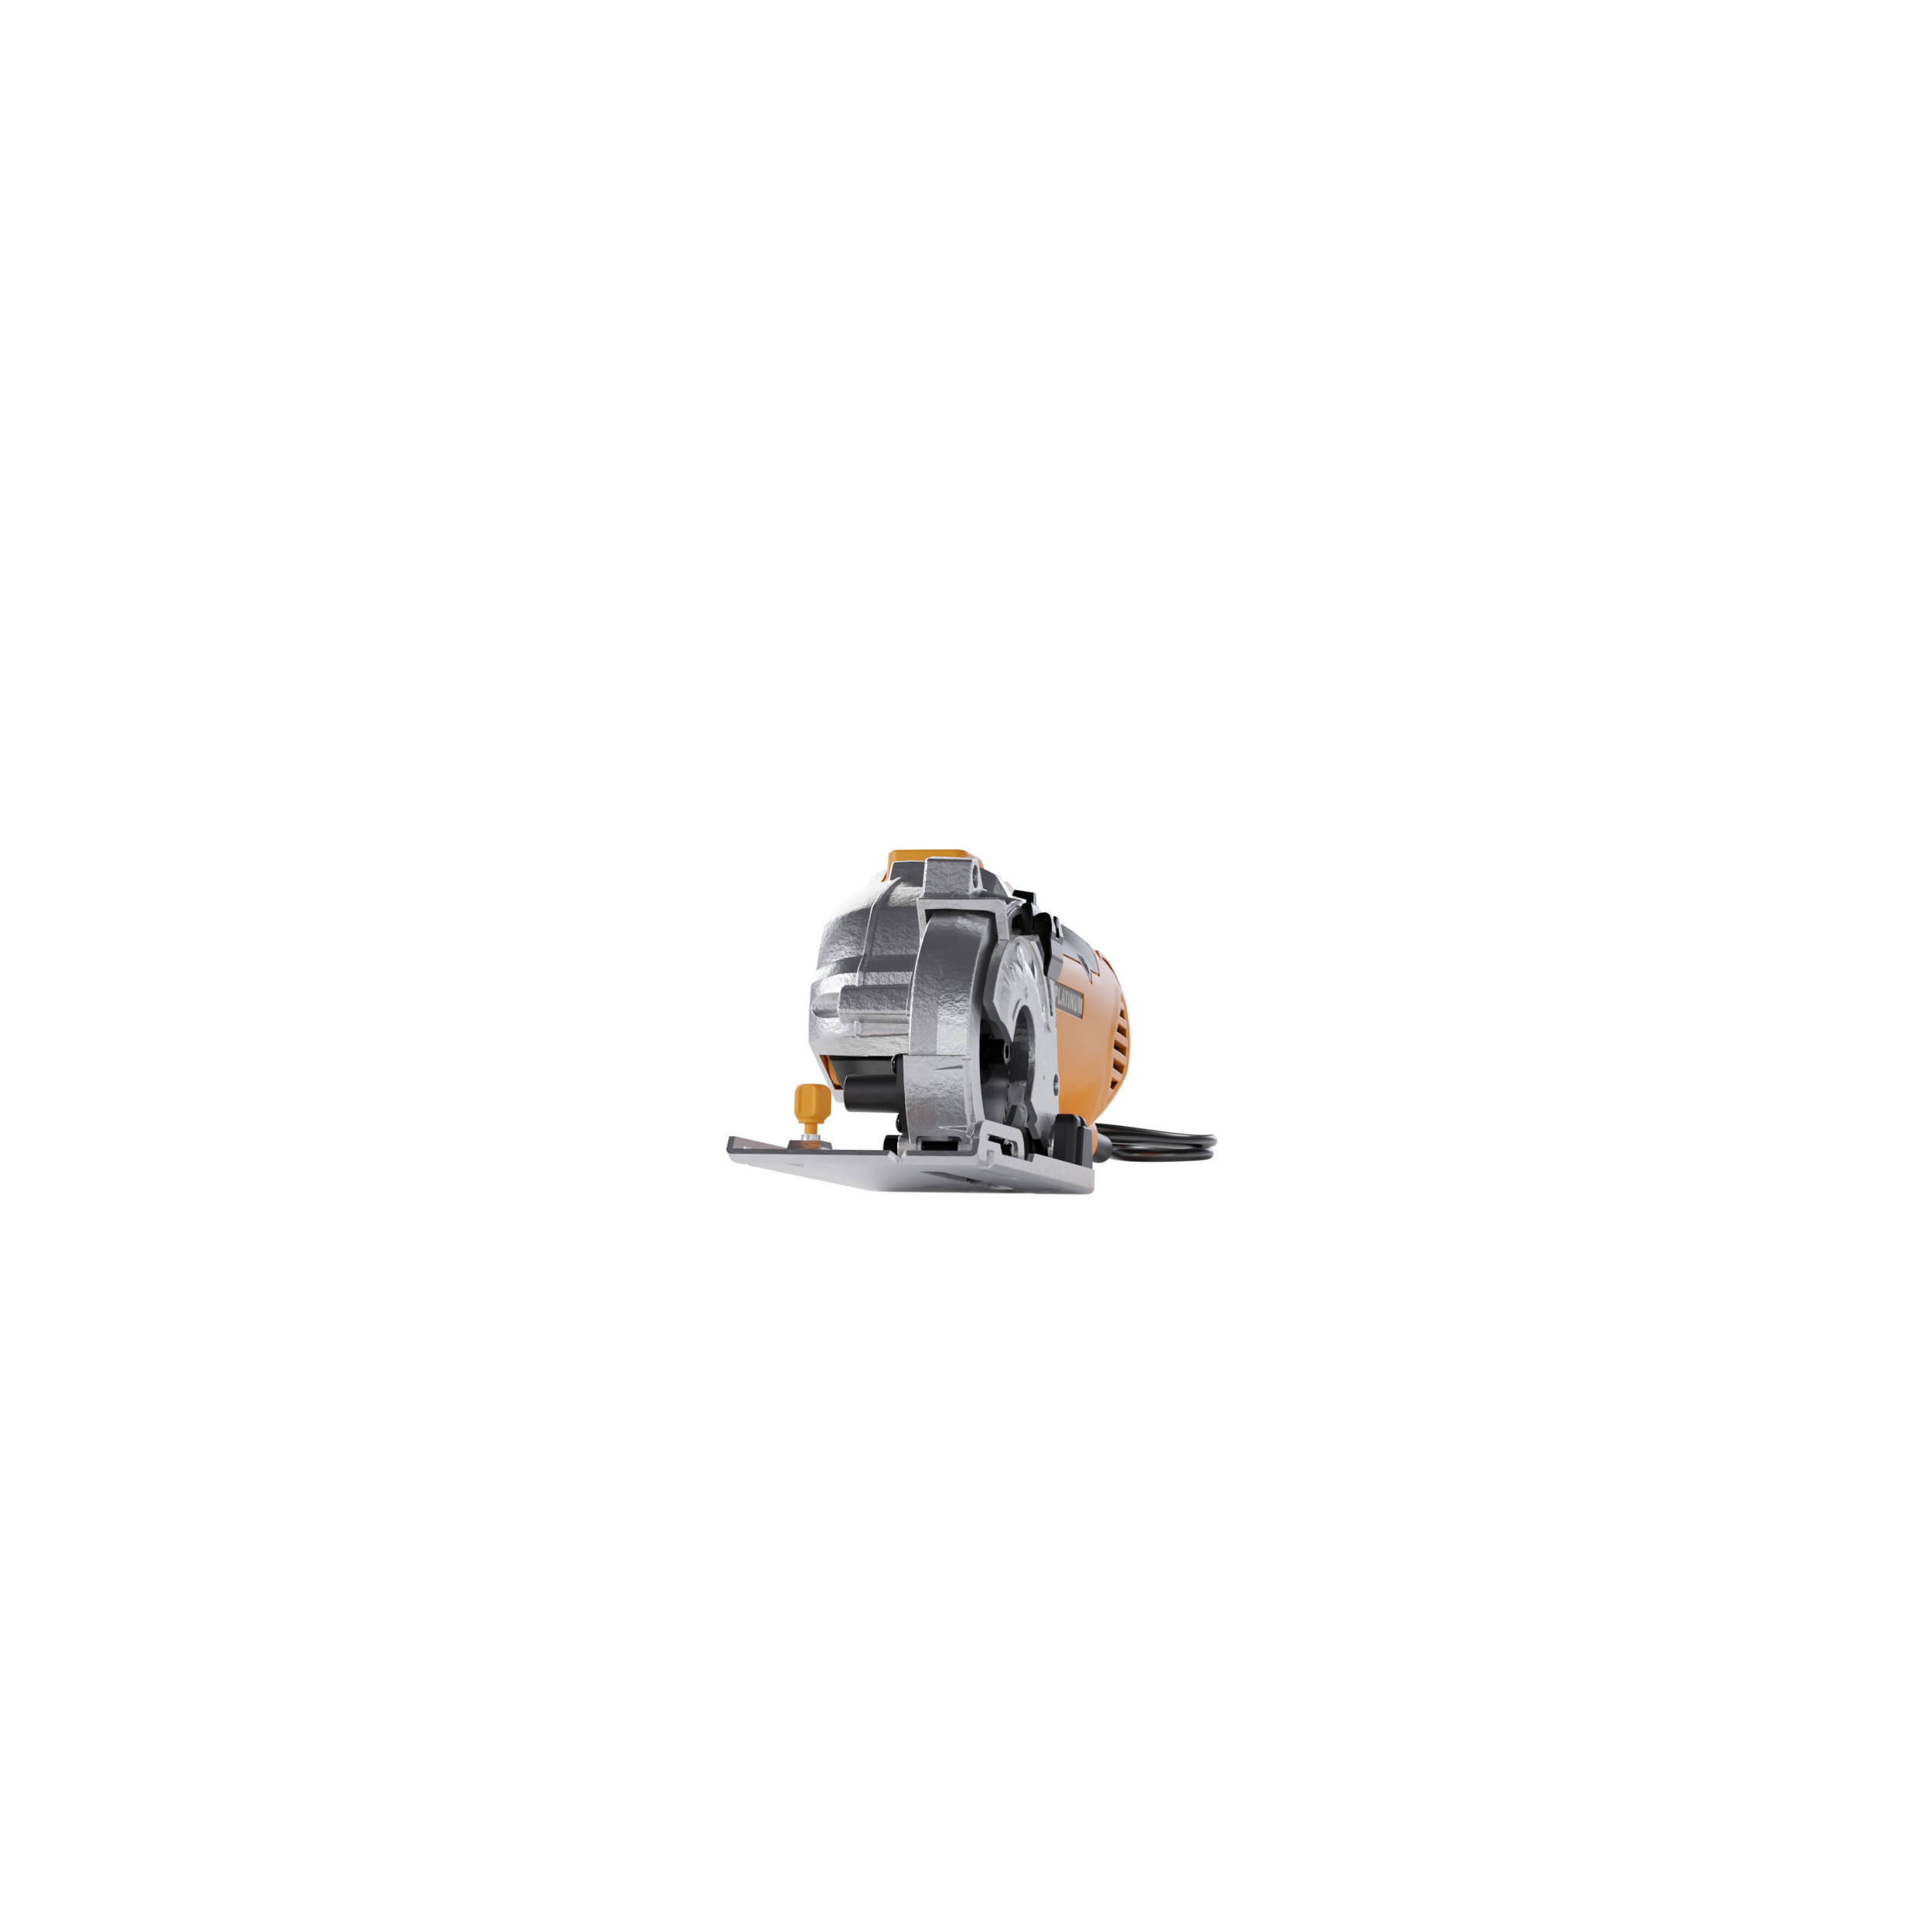 ROTORAZER SAW Platinum Compact Circular Saw Set - Extra Powerful - Deeper  Cuts! DIY Projects - Cut Drywall, Tile, Grout, Metal, Pipes, PVC, Plastic